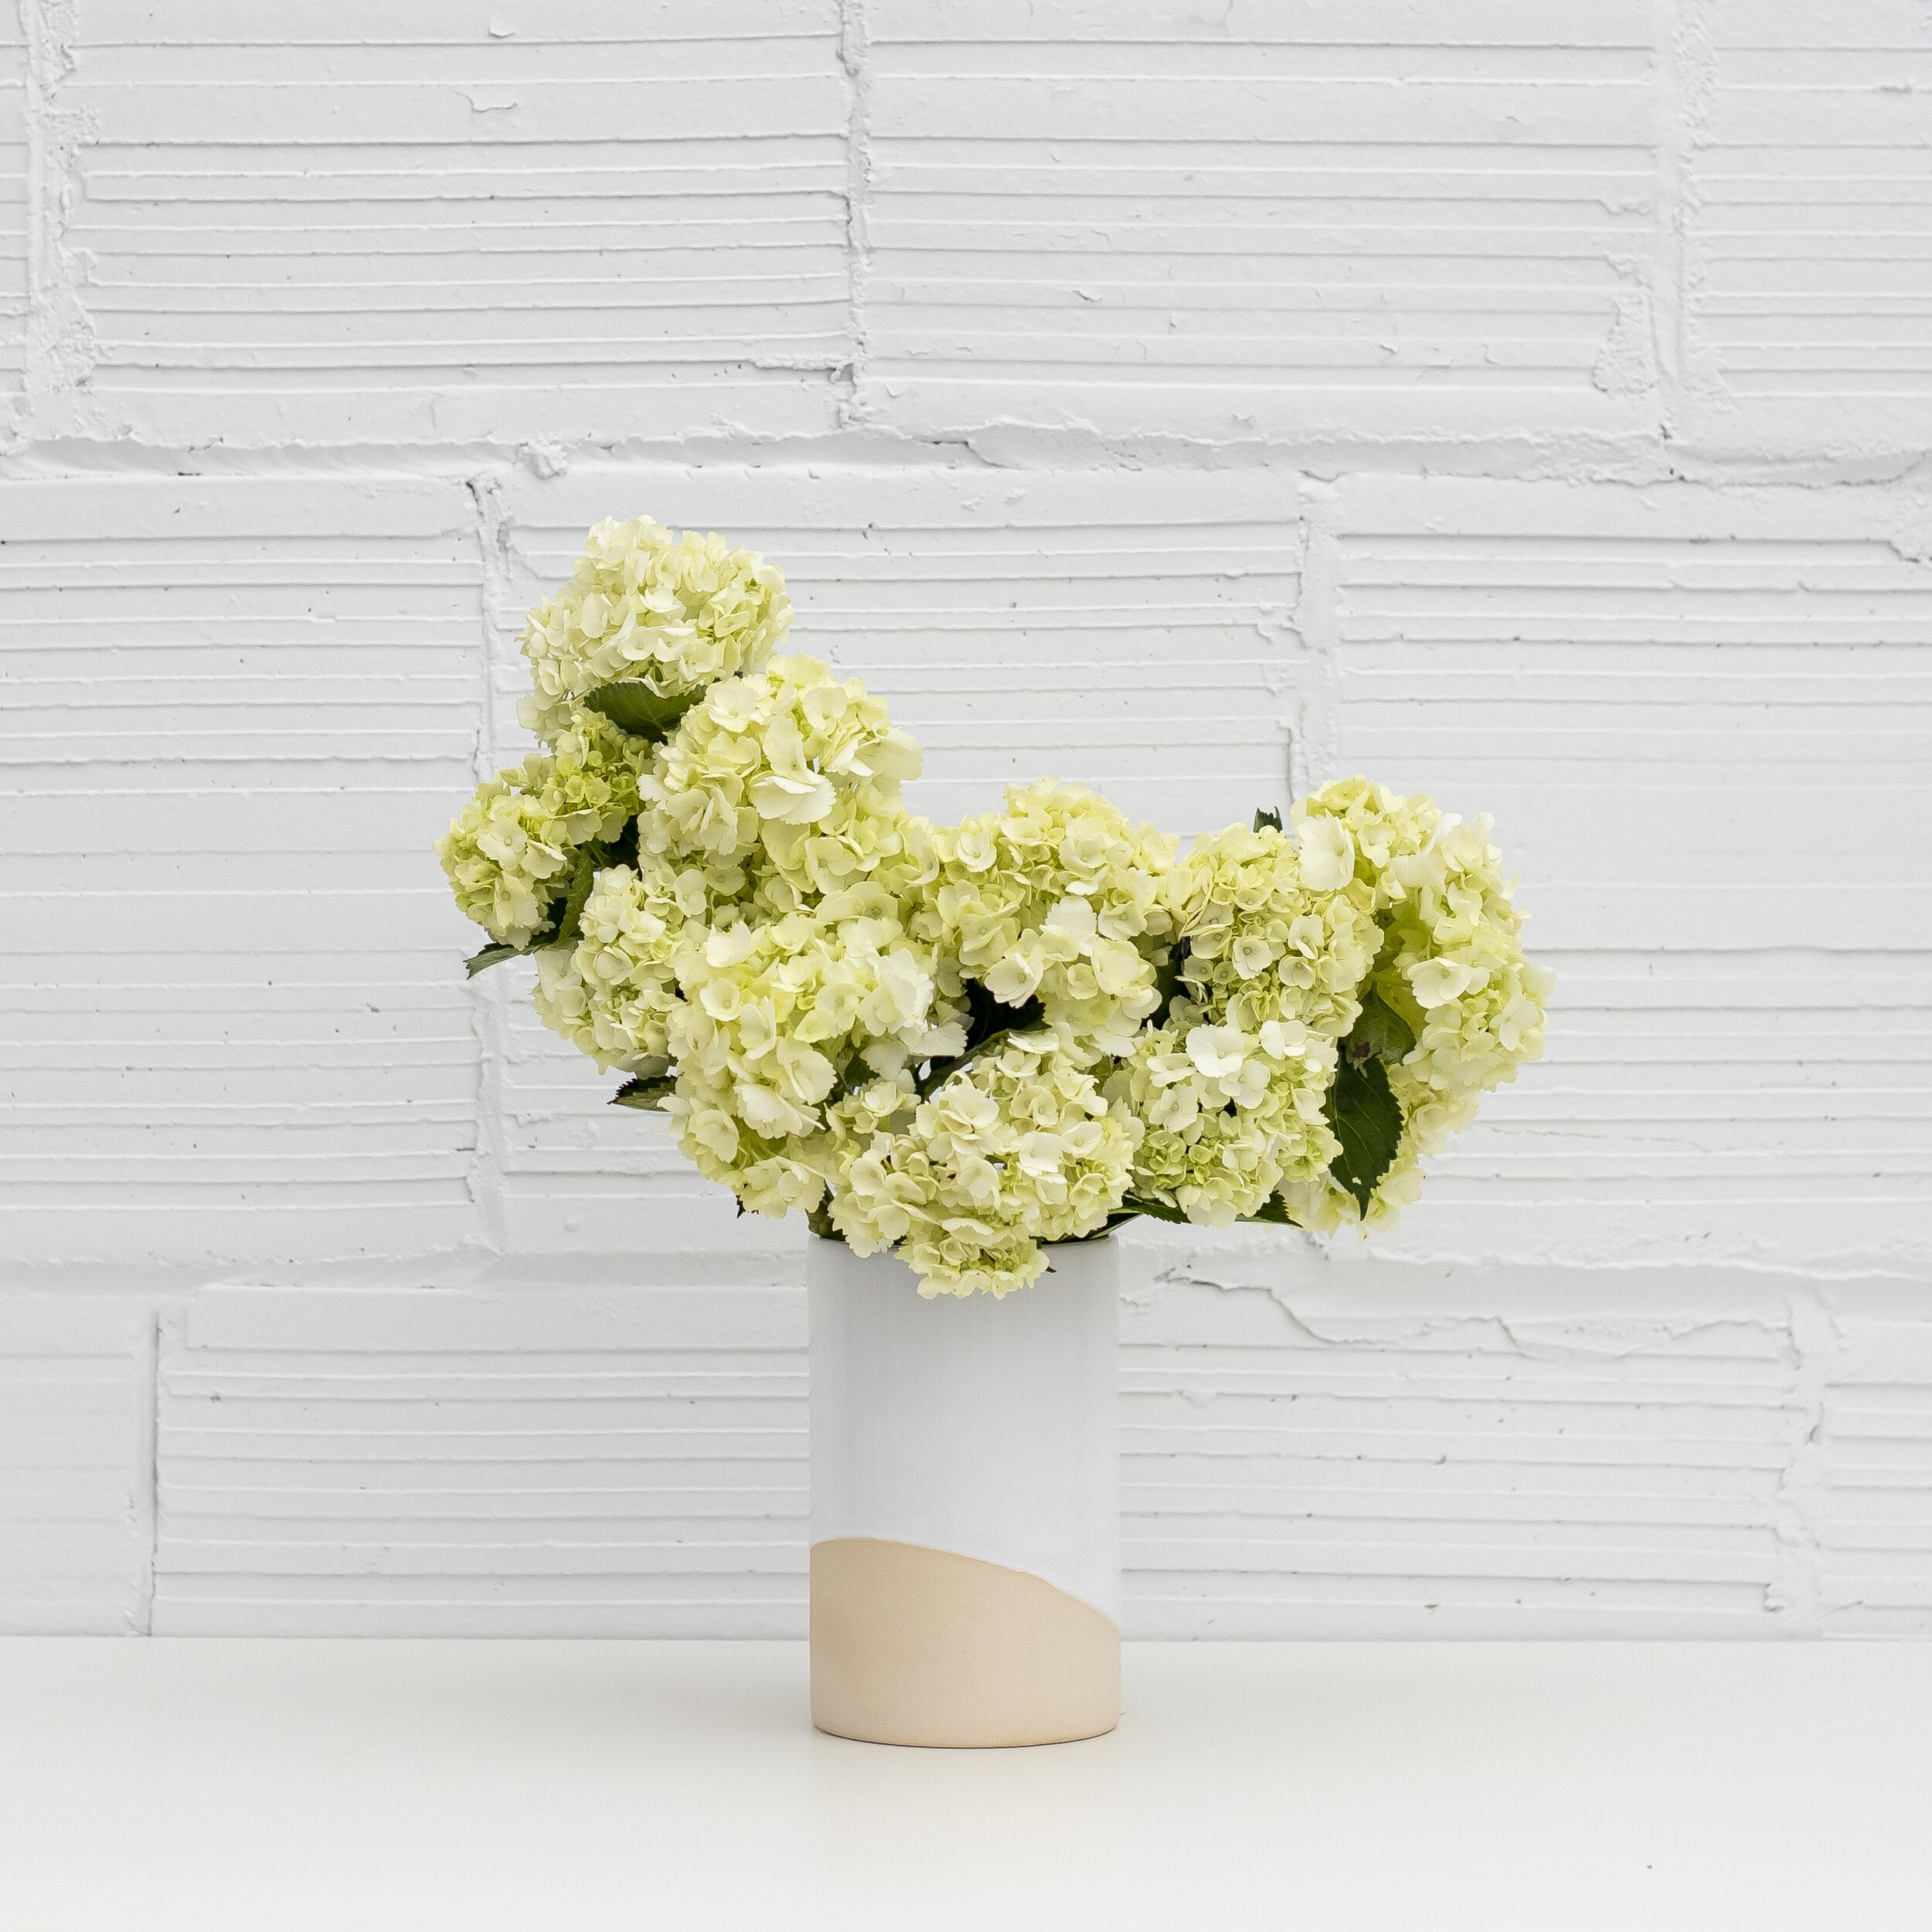 An arrangement of yellow hydrangea stems in white and tan vase